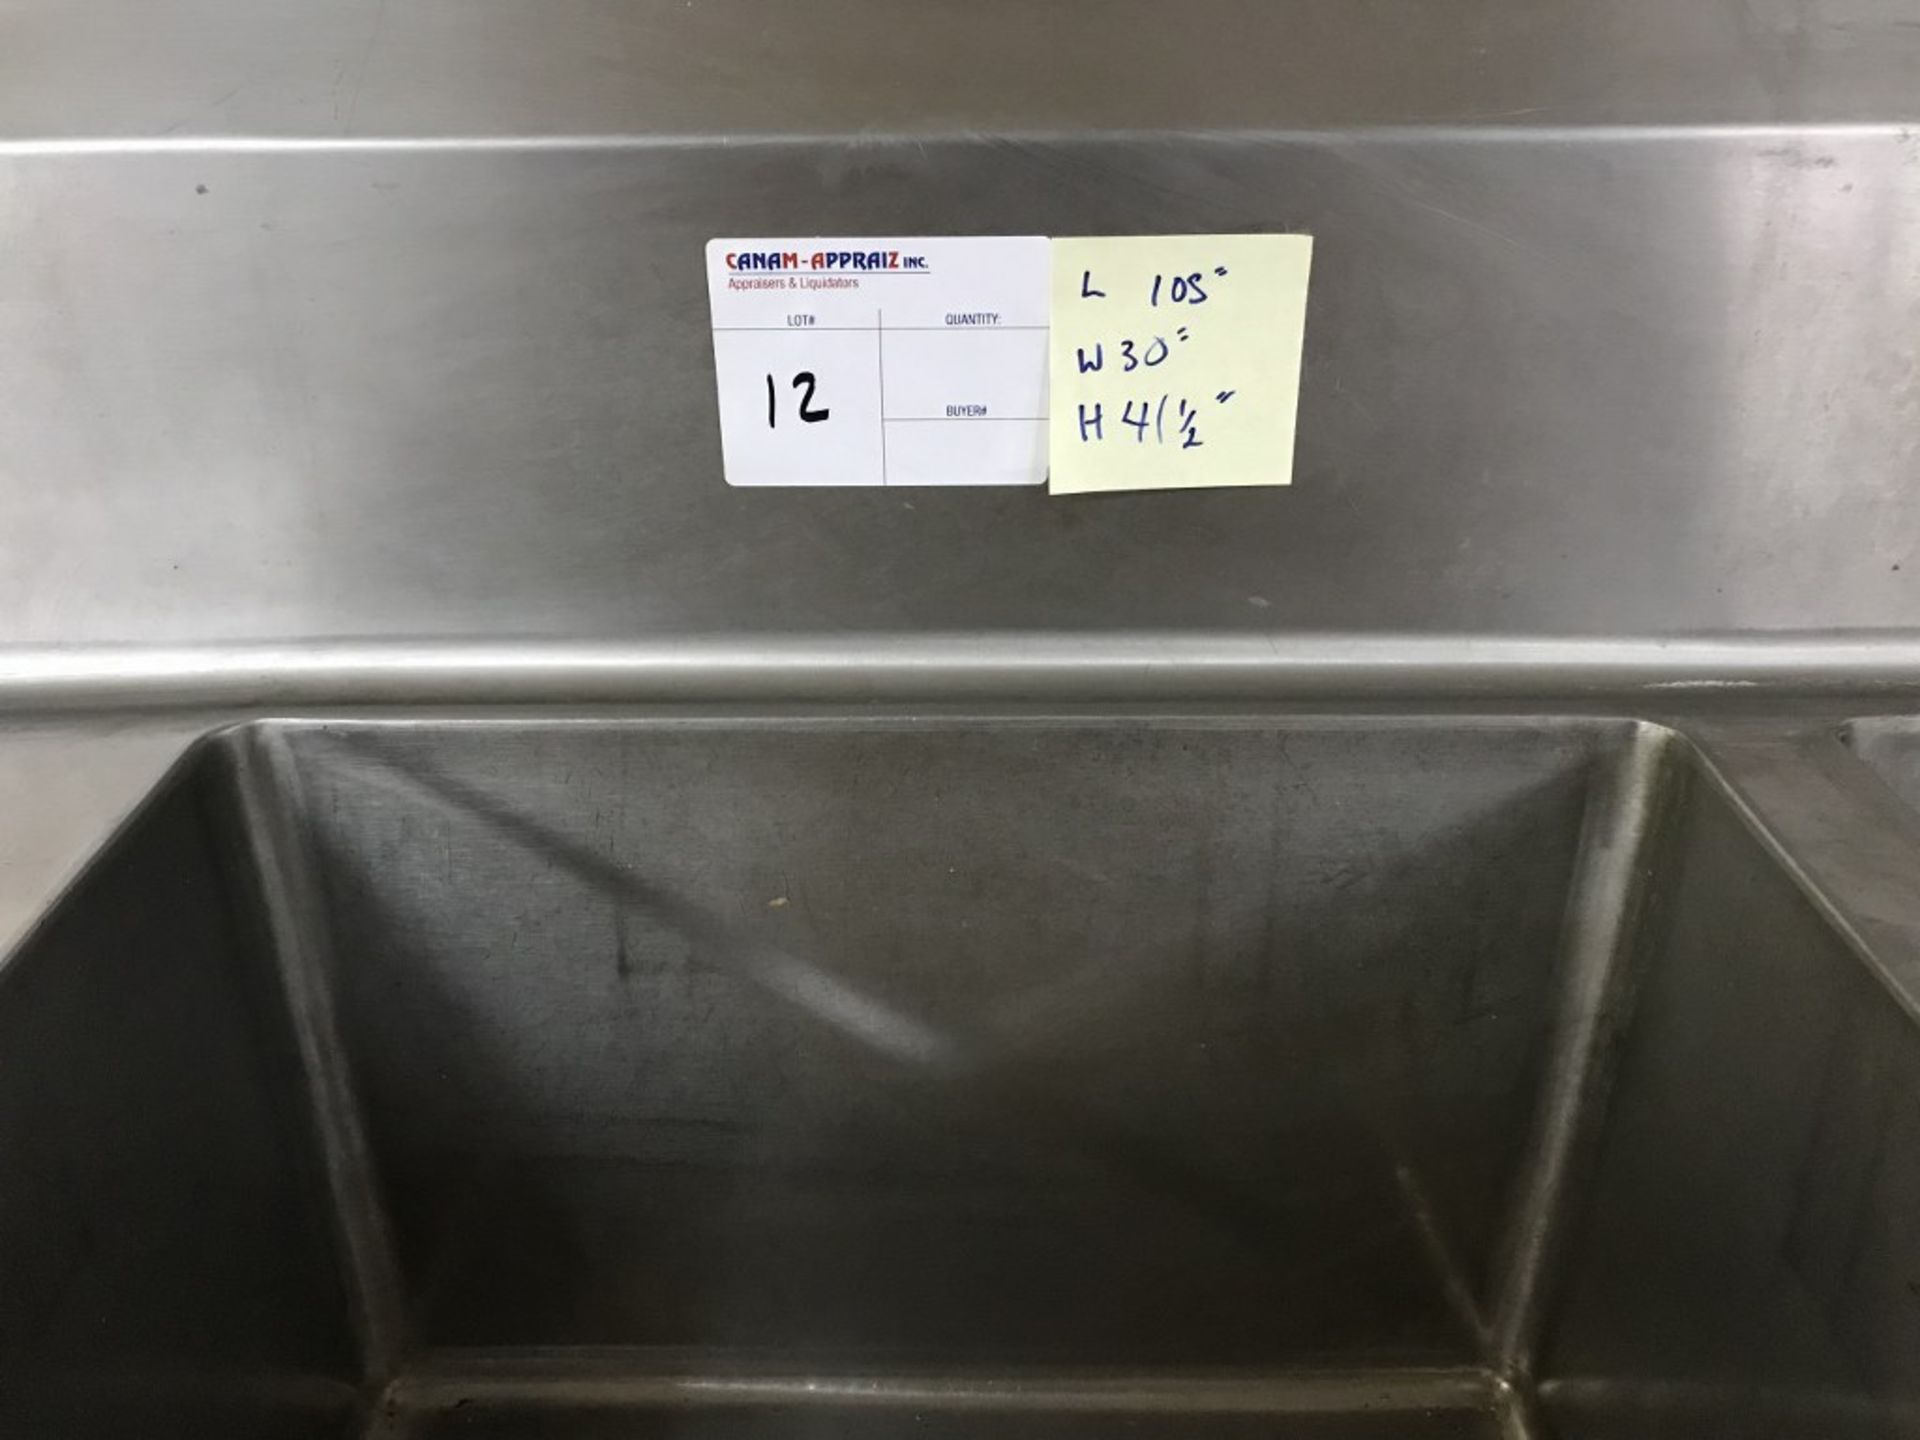 3 WELL - STAINLESS STEEL WASH SINK. 105"L X 30"W X 41.5"H - Image 2 of 6